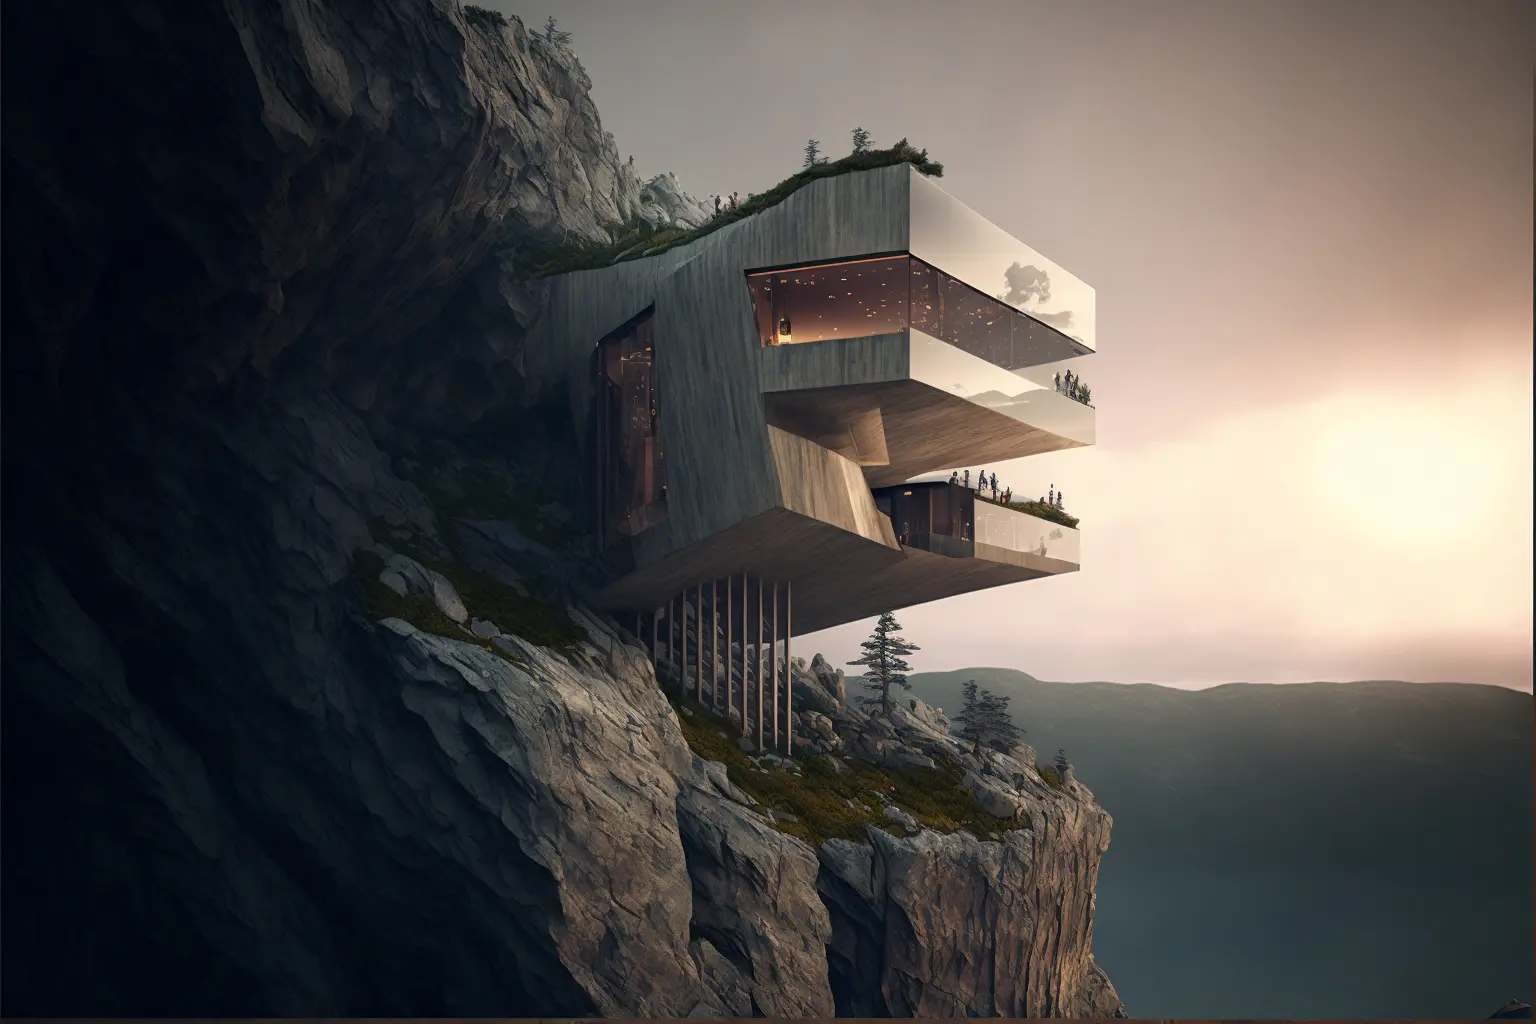 resort embed into a cliff designed by Kengo Kuma, architectural photography, style of archillect, futurism, modernist architecture 